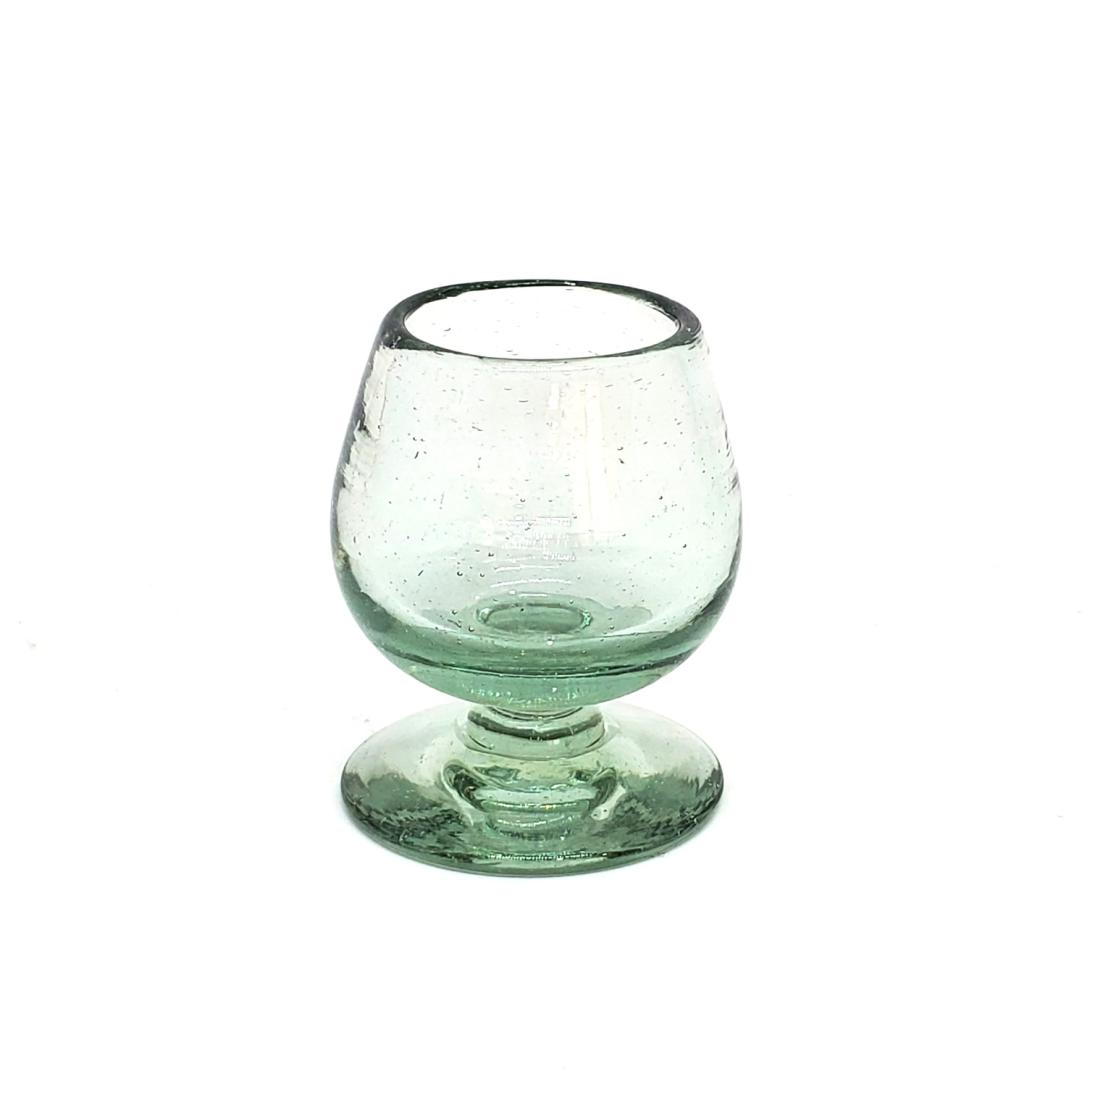 Wholesale Tequila Shot Glasses / Clear 2.5 oz Tequila Sippers   / Sip your favourite tequila or mezcal with these iconic clear handcrafted sipping glasses. You may also serve lemon juice or other chasers.